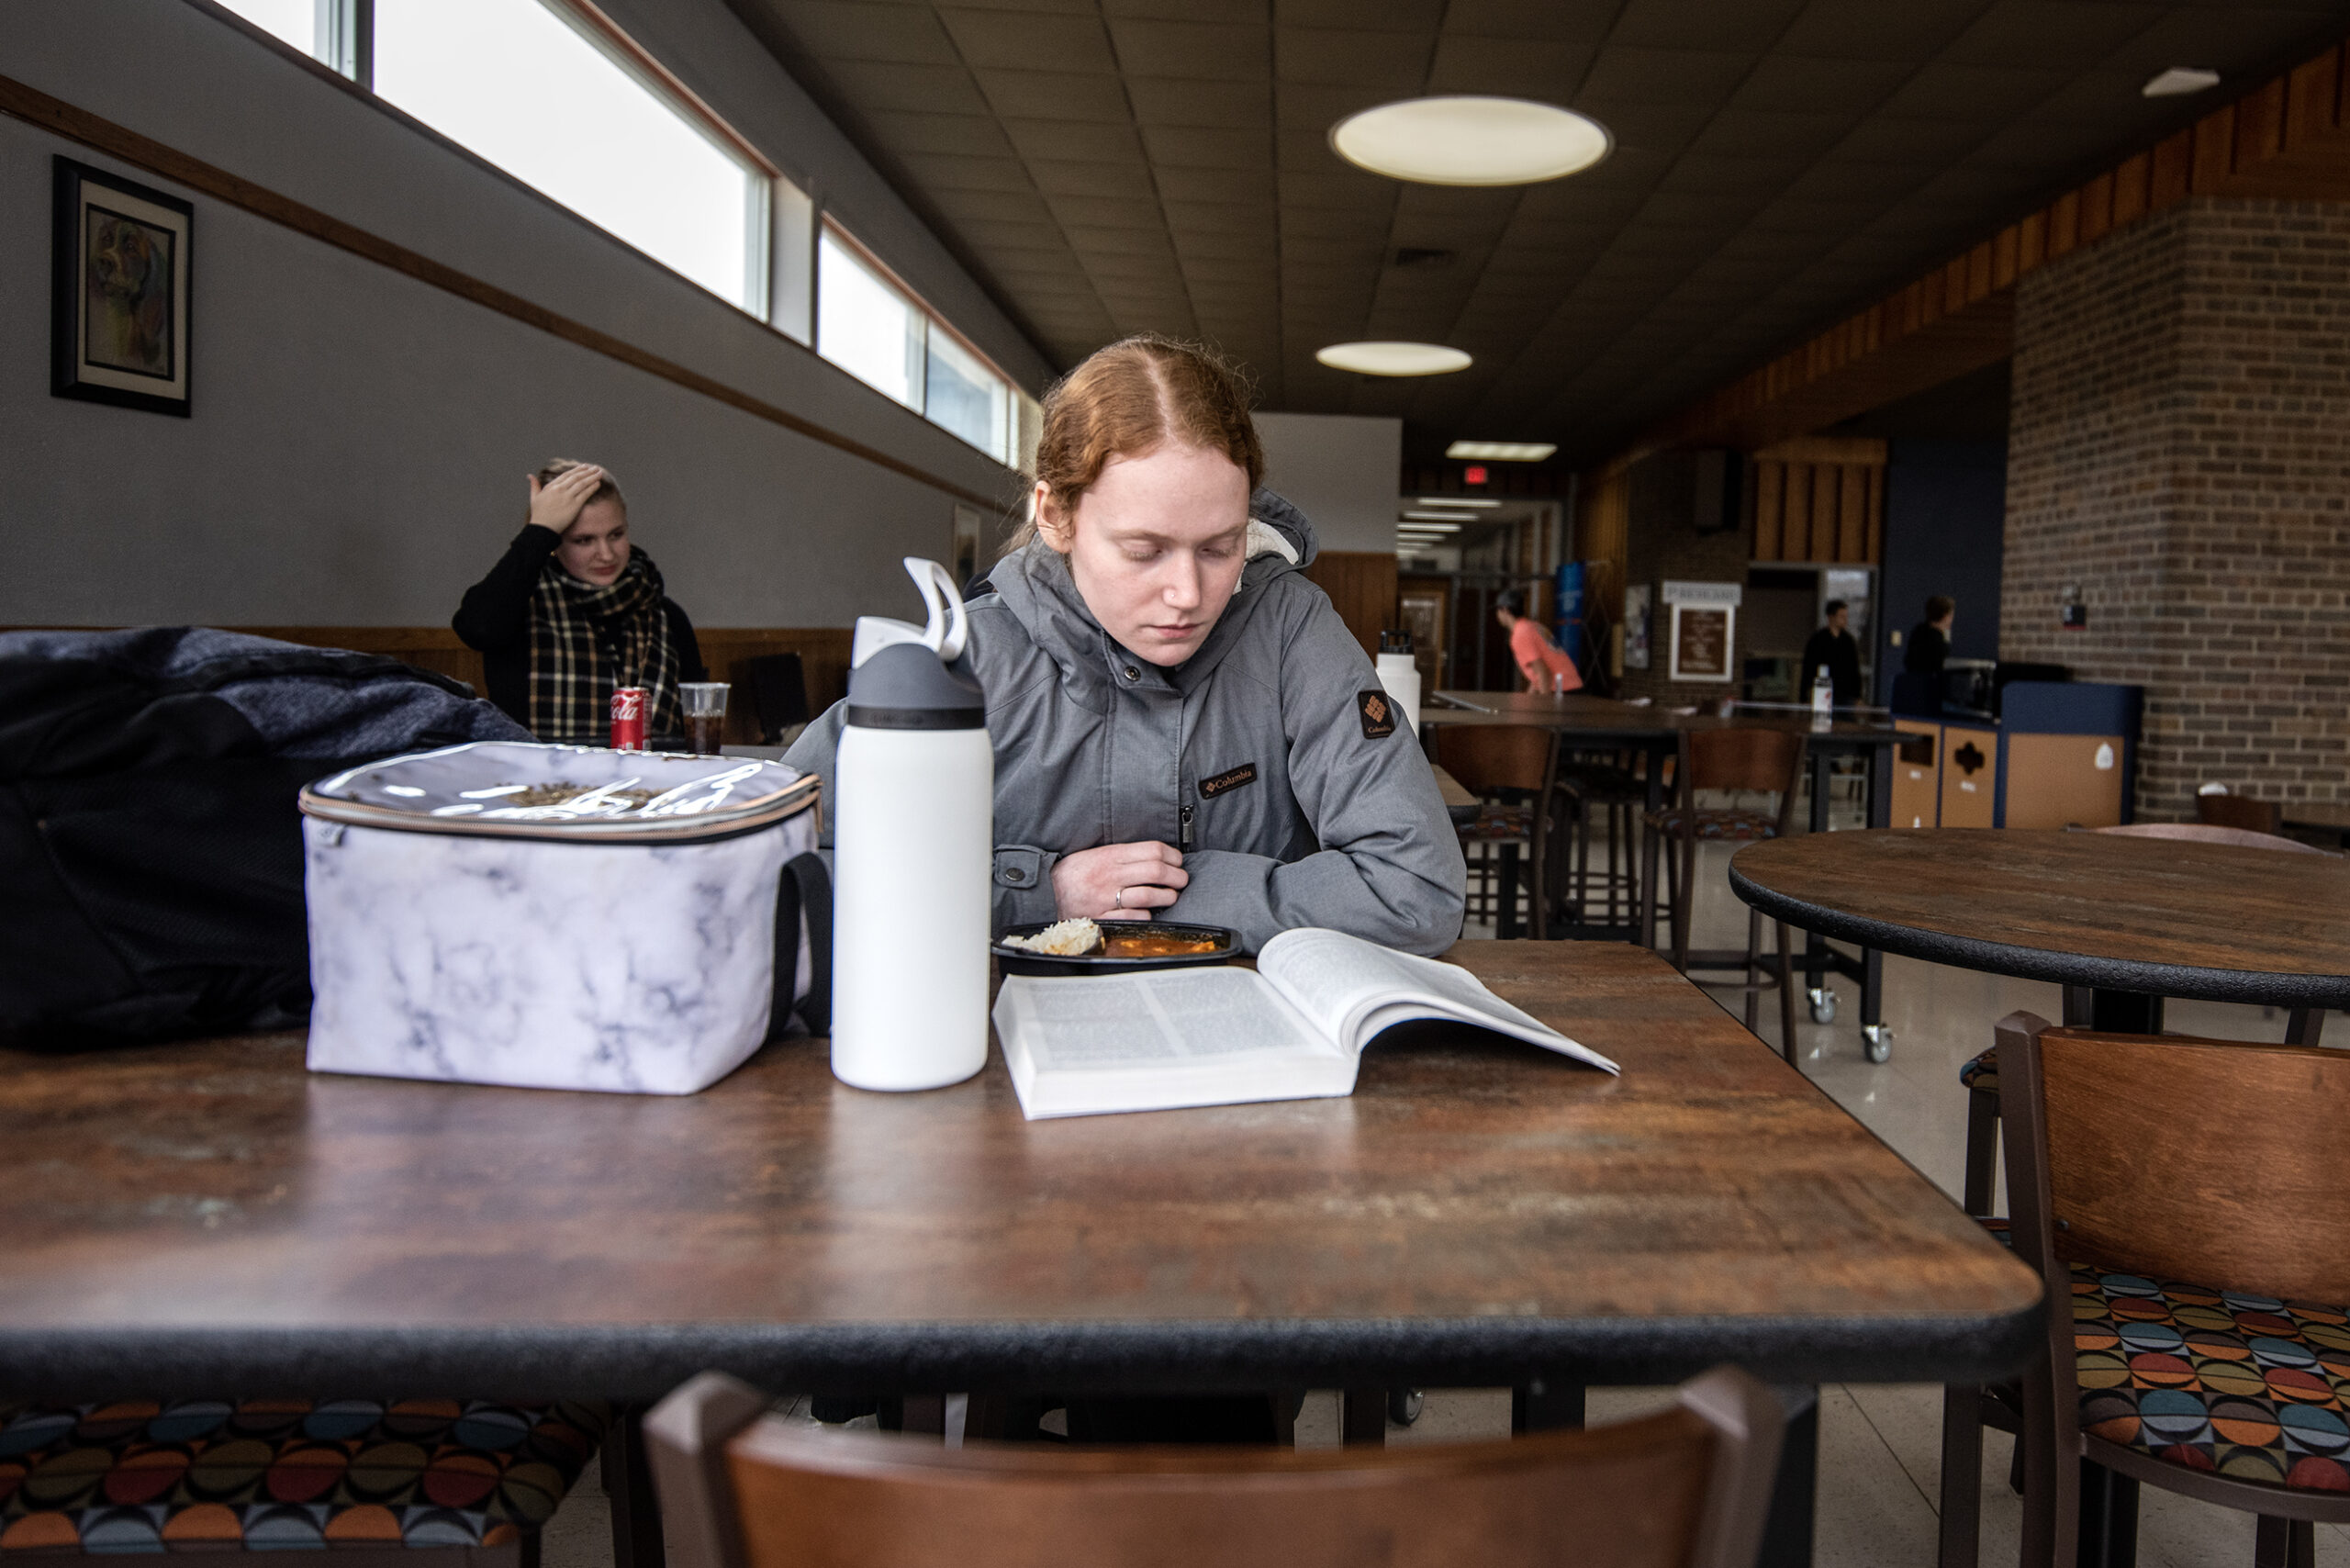 A student sits at a table and reads a book. A lunchbox and water bottle are next to her.